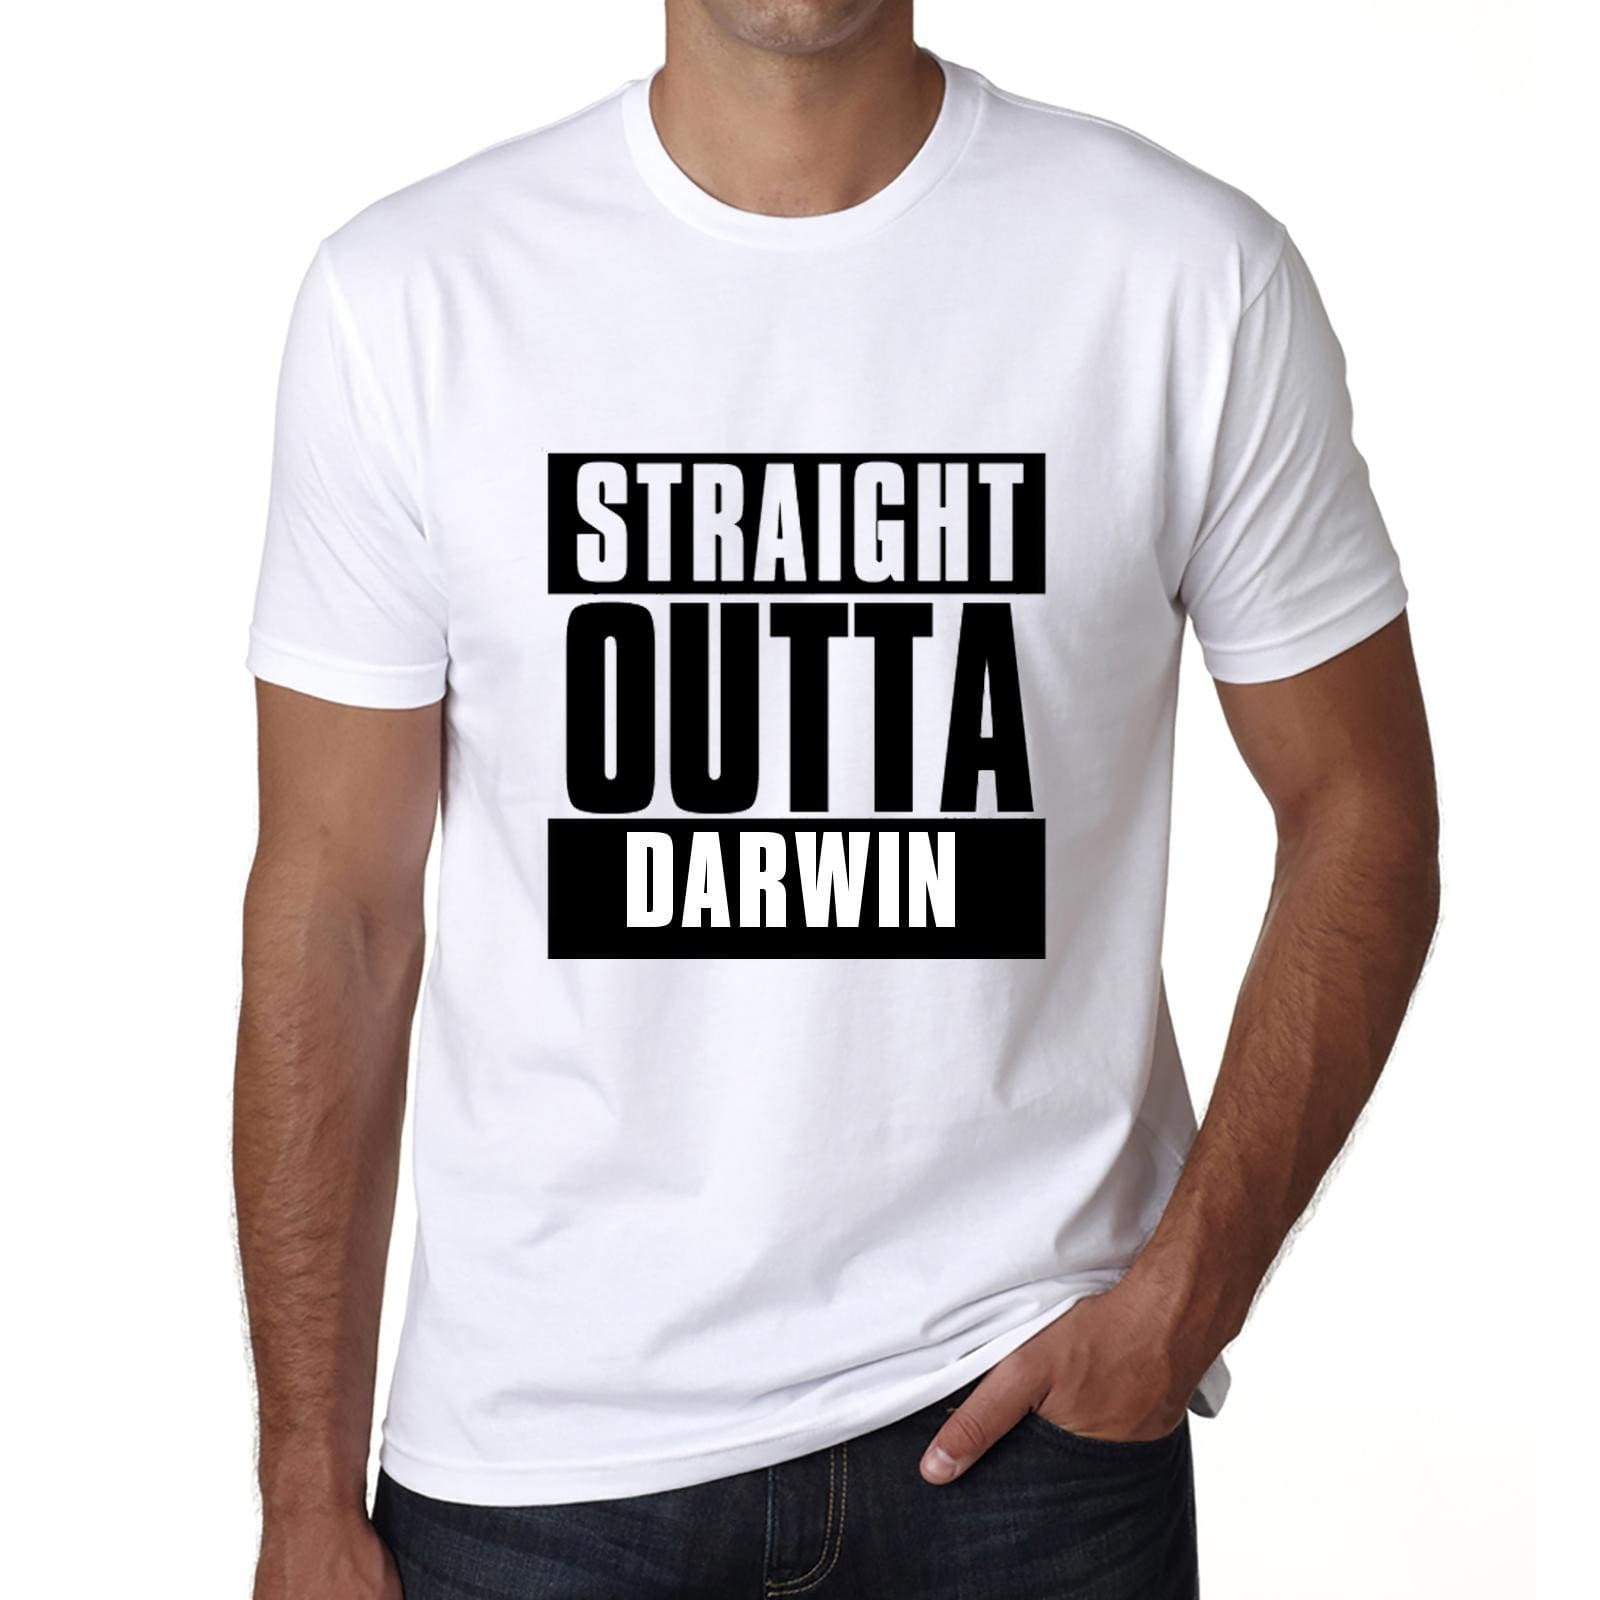 Straight Outta Darwin Mens Short Sleeve Round Neck T-Shirt 00027 - White / S - Casual